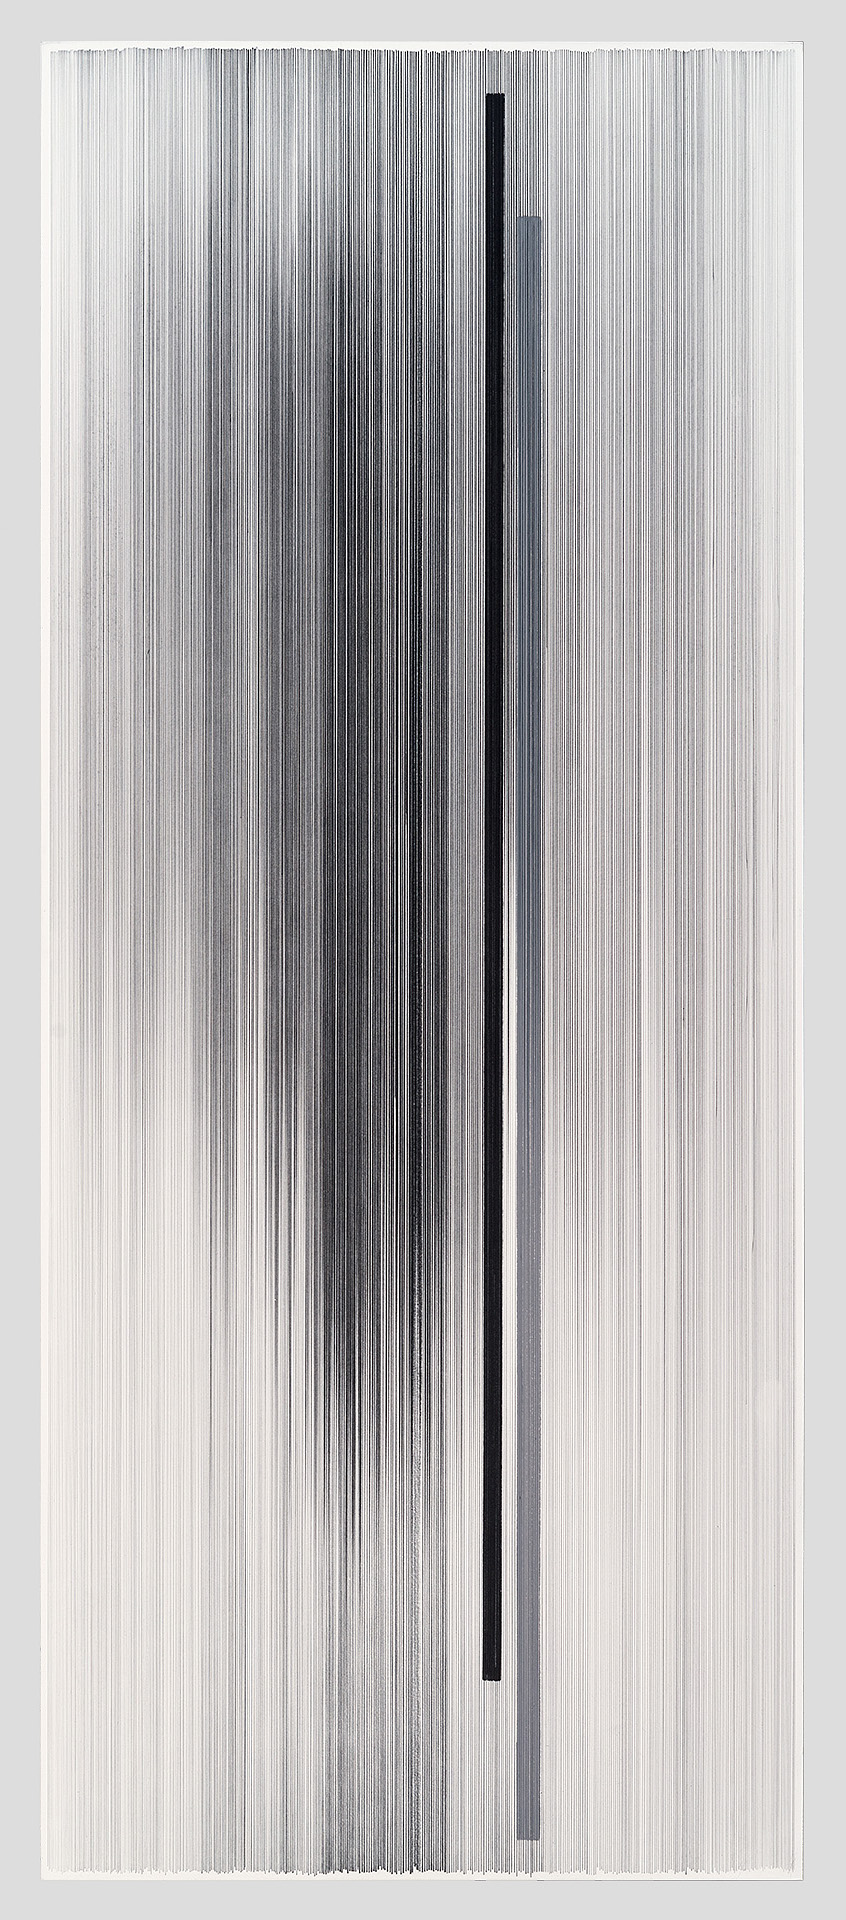    notations 02   2014 graphite and colored pencil on mat board 58 x 24 inches 